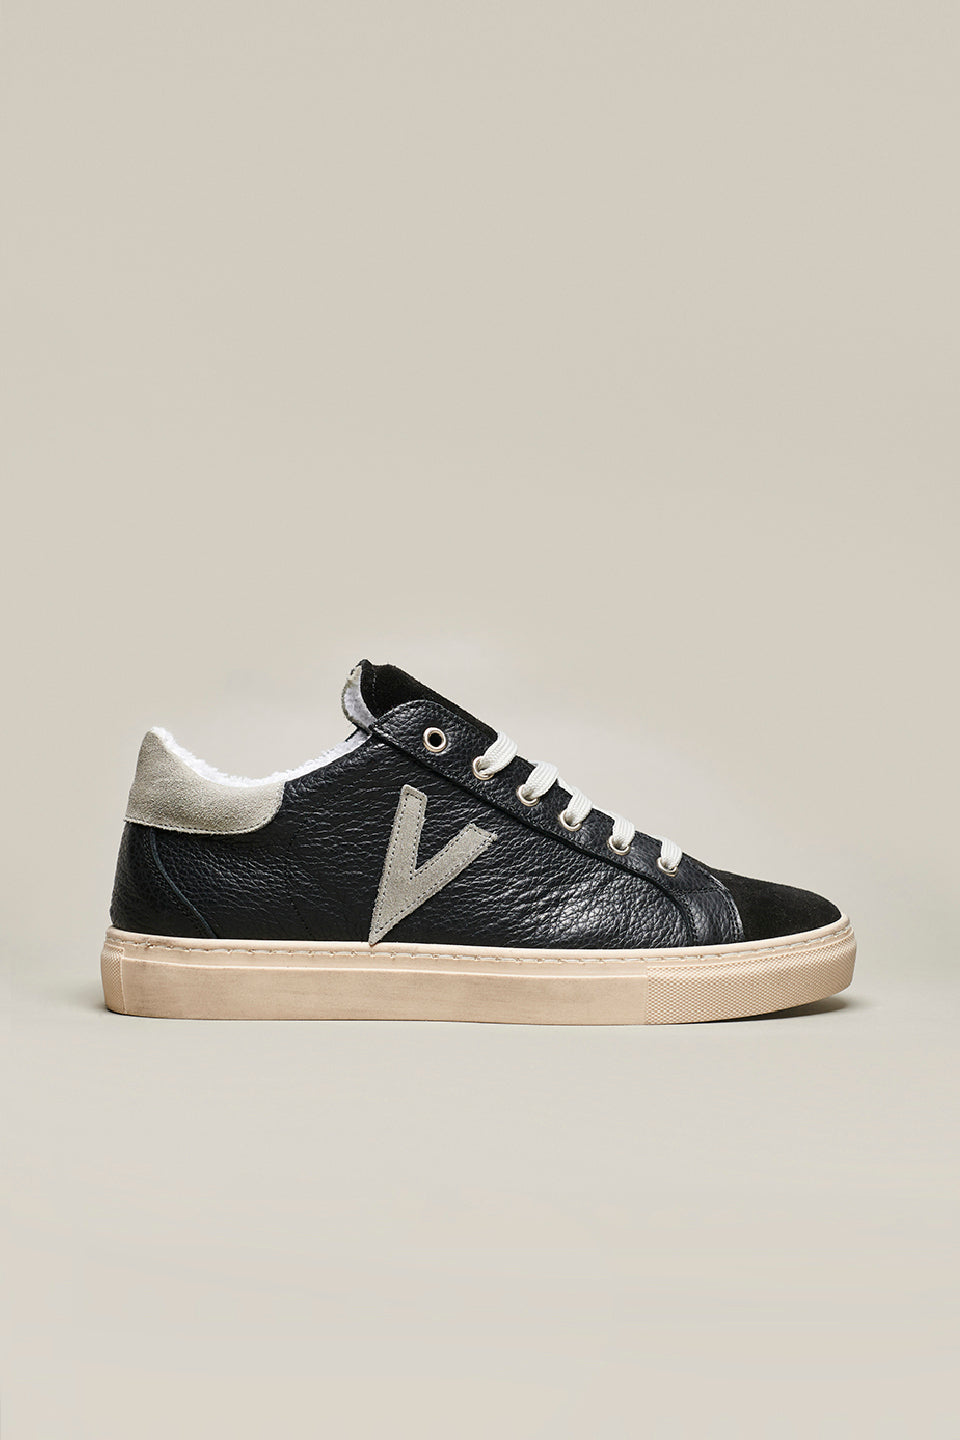 OLYMPIC - Low sole sneakers in black textured leather with gray back and insert